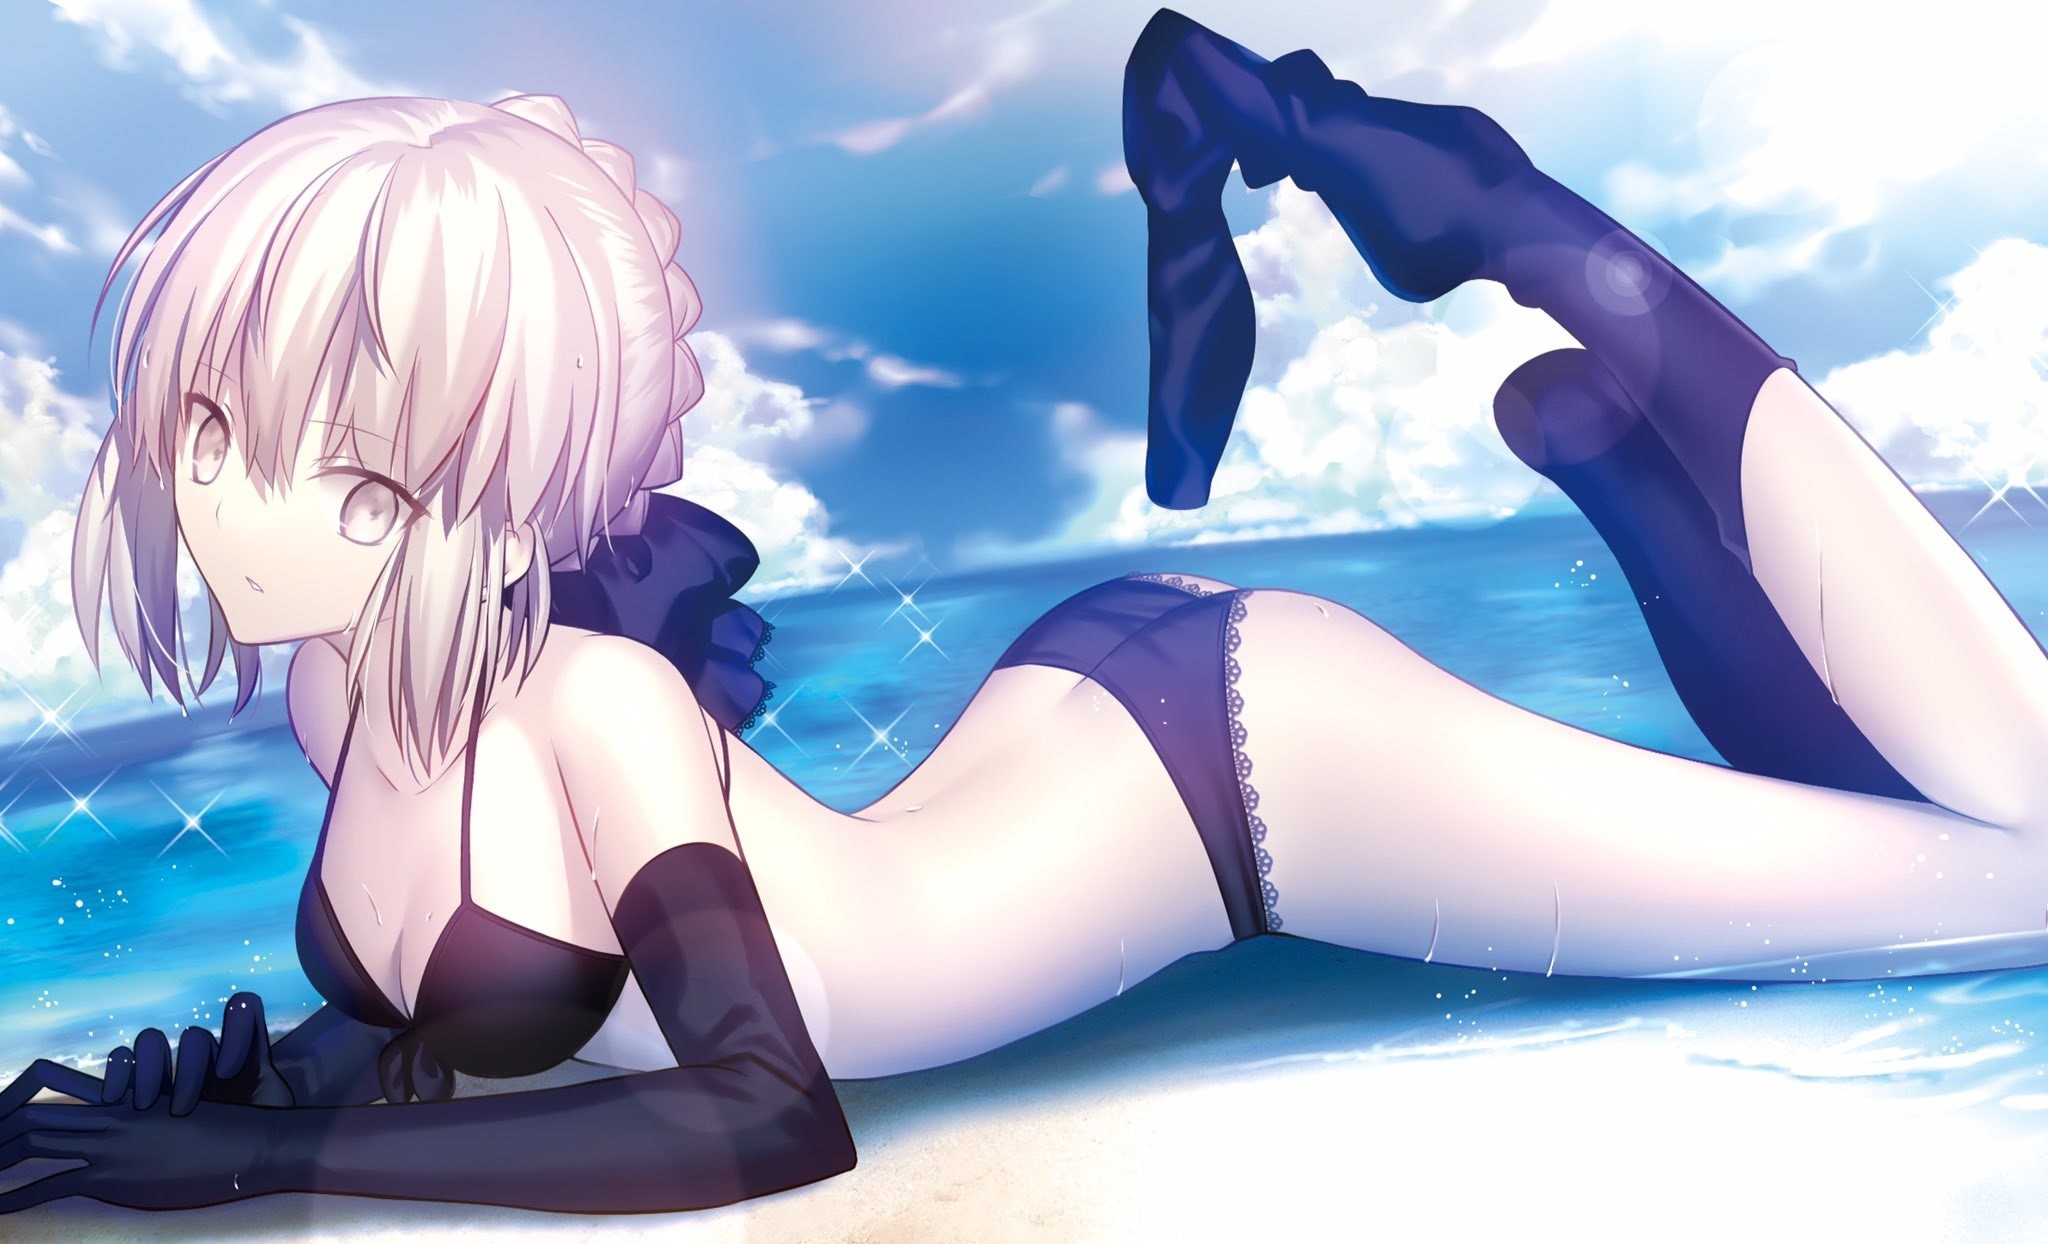 Anime 2048x1244 anime anime girls Saber Alter ass cleavage wet beach blonde elbow gloves Fate series Fate/Stay Night gloves thigh-highs yellow eyes sky clouds lying on front missing sock bikini Shinooji Artoria Pendragon